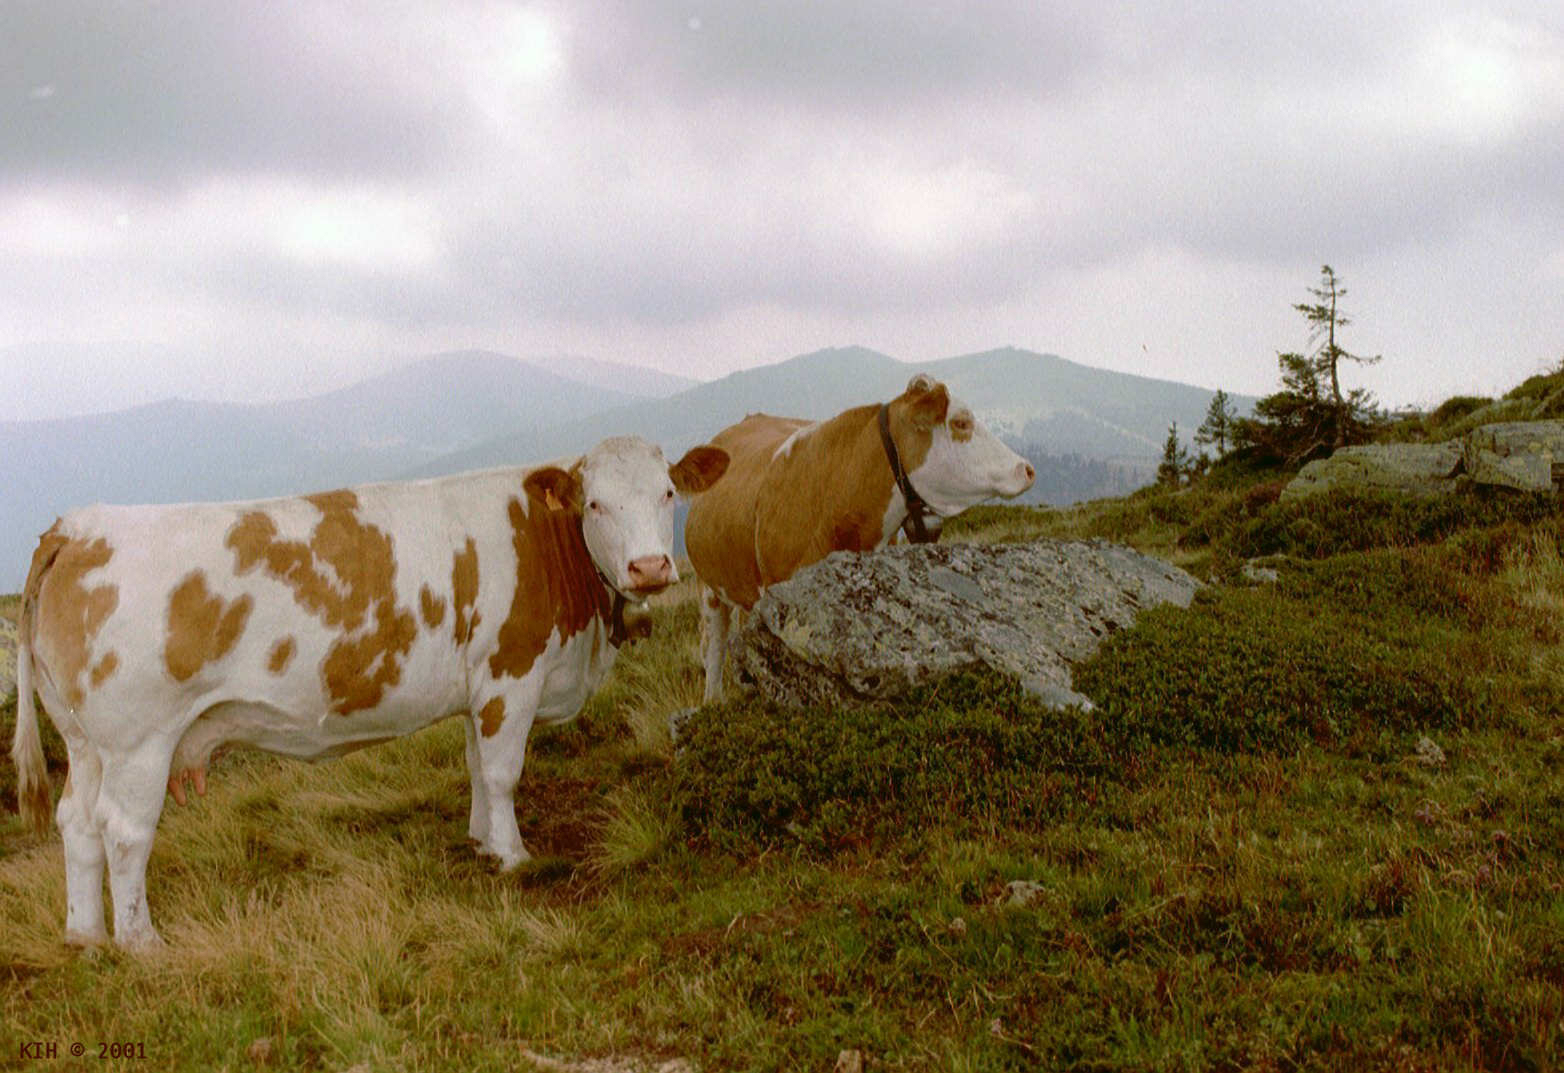 ImgX%2FRGES%2FFotosRGES%2FTwo Cows on Hill %5BAT 2001%5D   KIH